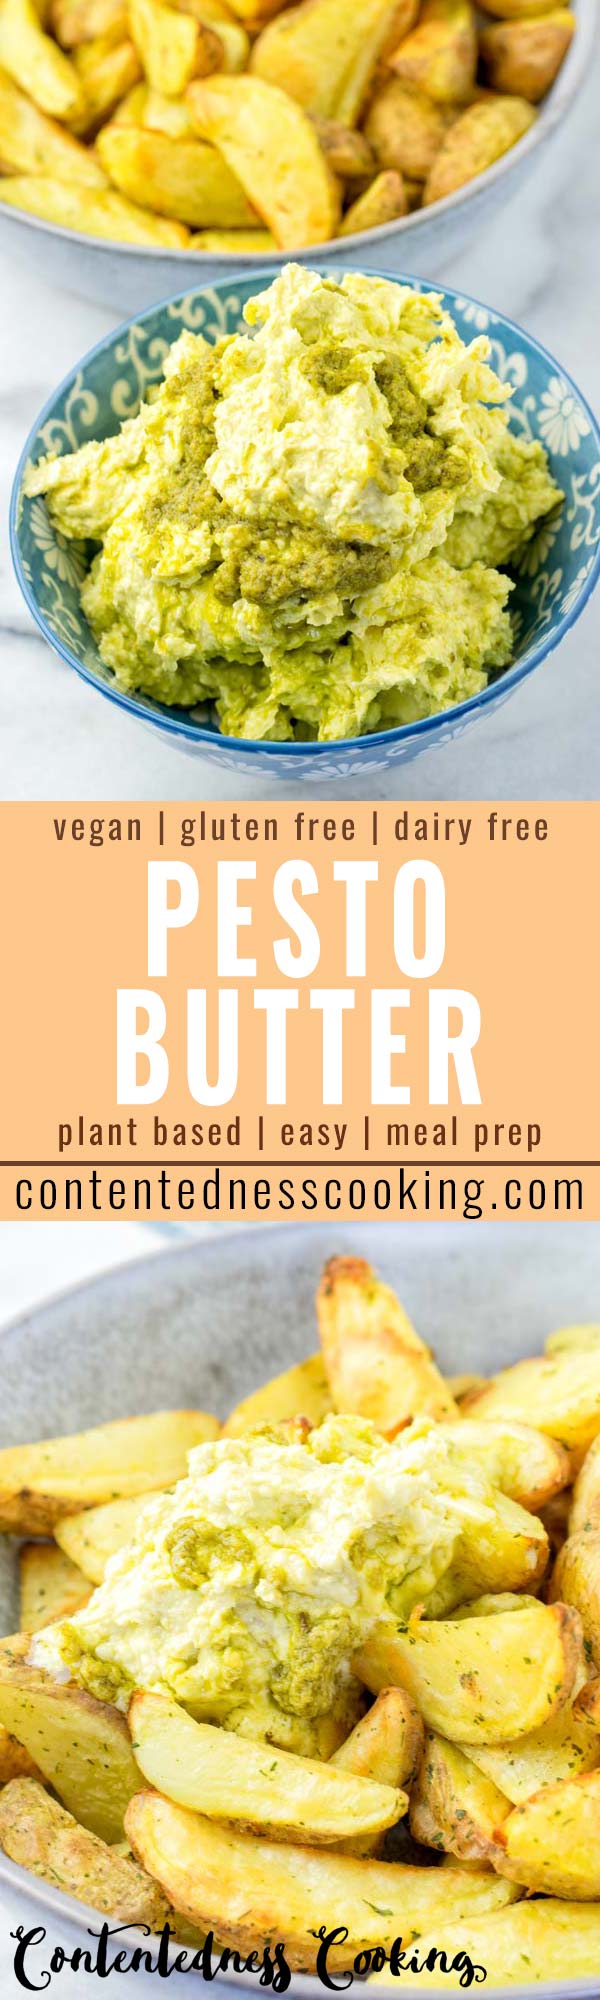 This Pesto Butter is super easy to make, versatile and so comforting. No one would ever guess it is vegan, gluten free, and it tastes so delicious over pasta, bread and potatoes. This will surely become a family favorite in no time. #vegan #dairyfree #glutenfree #pesto #butter #vegetarian #dinner #lunch #mealprep #comfortfood #contentednesscooking